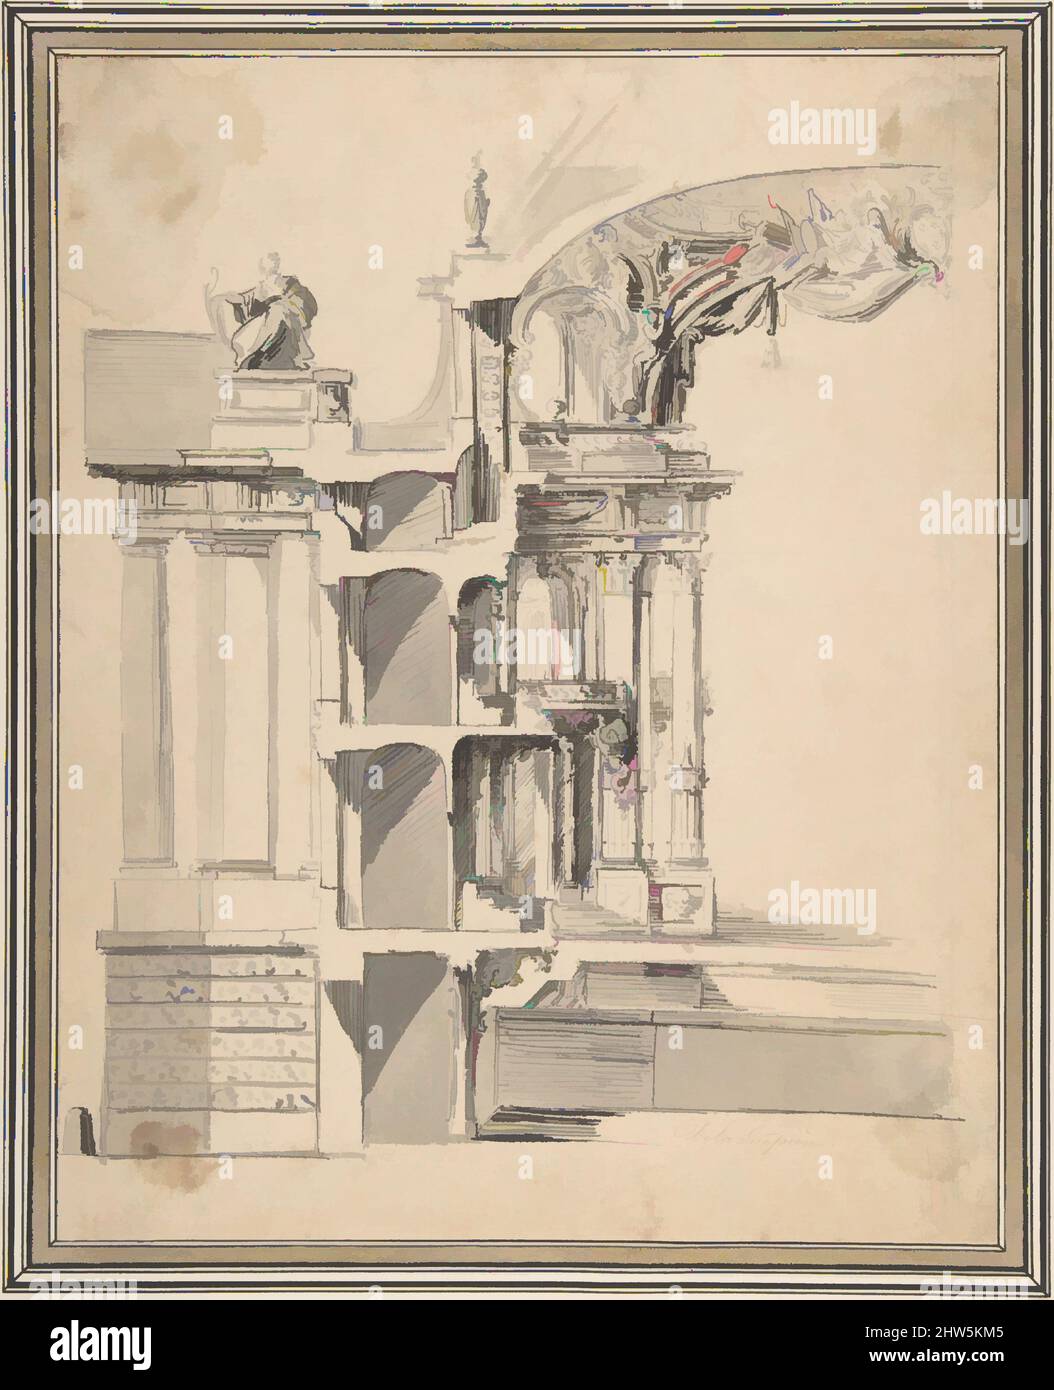 Art inspired by Design for the Proscenium Arch of an Opera house and the Section Adjacent to the Stage, 18th century, Pen and black ink and gray wash, 10 3/16 x 8 1/16 in. (25.8 x 20.5 cm), Drawings, Philippe de La Guêpière (French, ca. 1715–1773 Paris, Classic works modernized by Artotop with a splash of modernity. Shapes, color and value, eye-catching visual impact on art. Emotions through freedom of artworks in a contemporary way. A timeless message pursuing a wildly creative new direction. Artists turning to the digital medium and creating the Artotop NFT Stock Photo